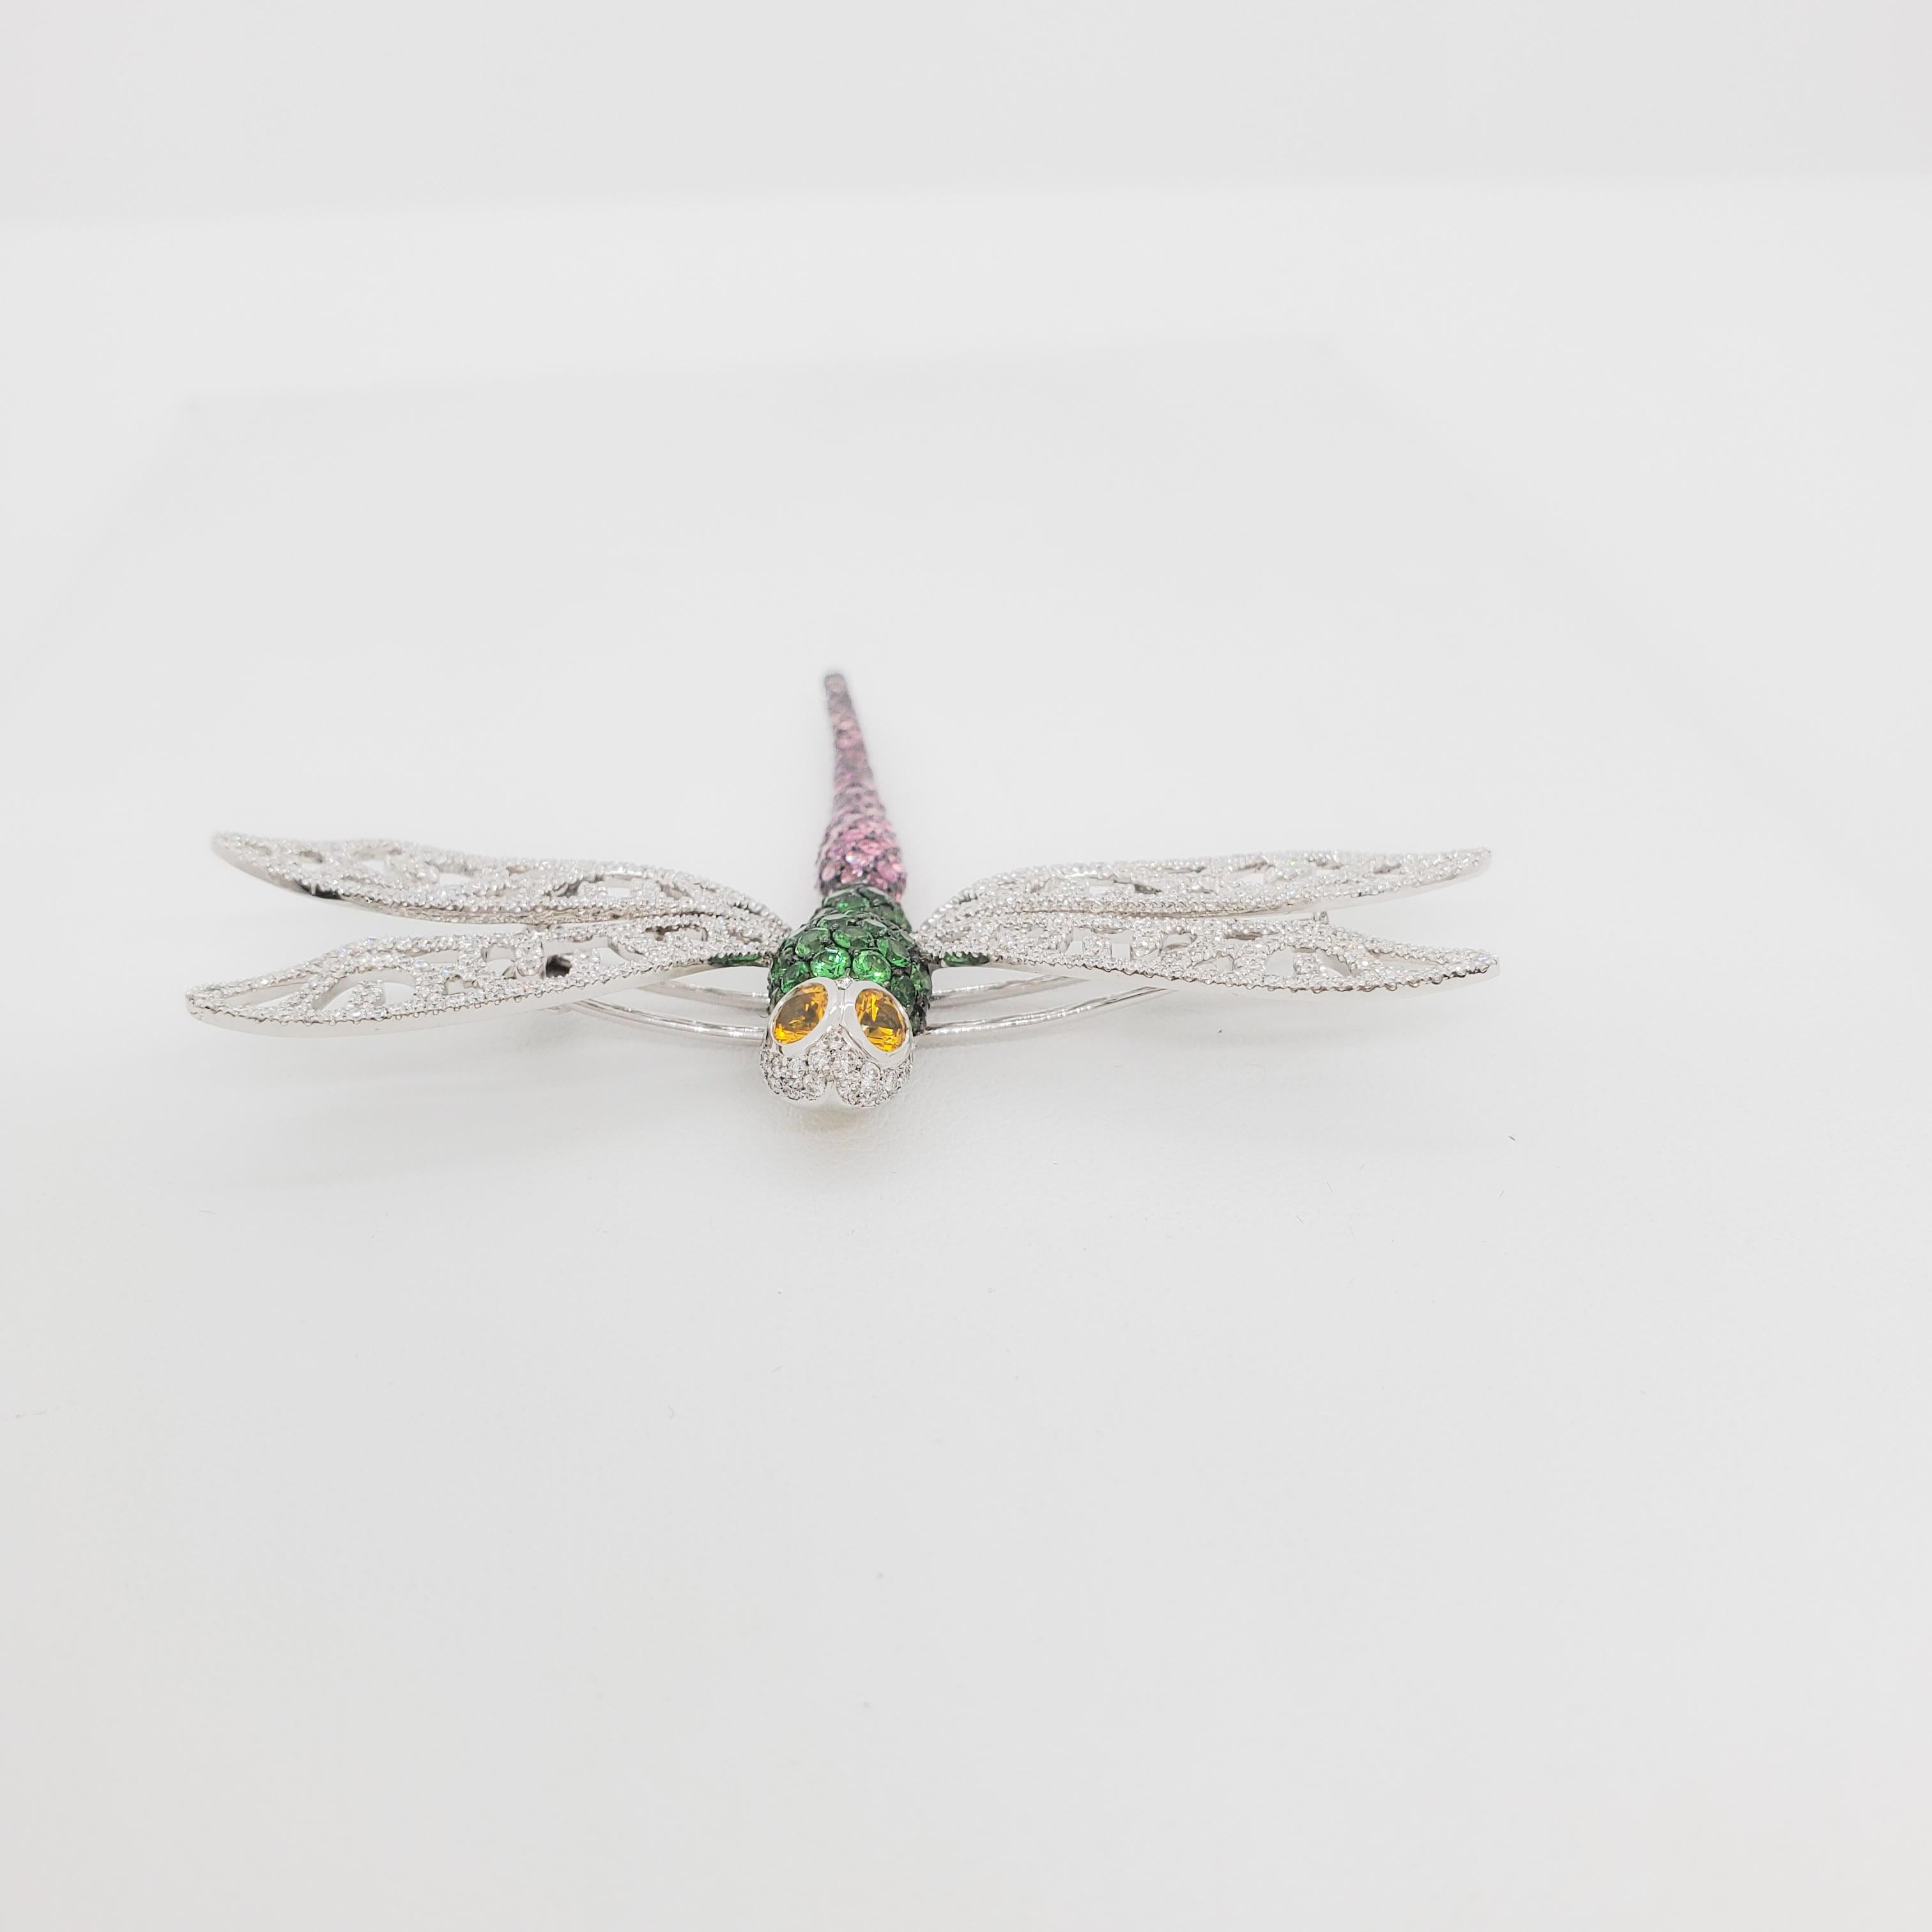 Round Cut Estate Diamond and Gemstone Dragonfly Brooch in 18k White Gold